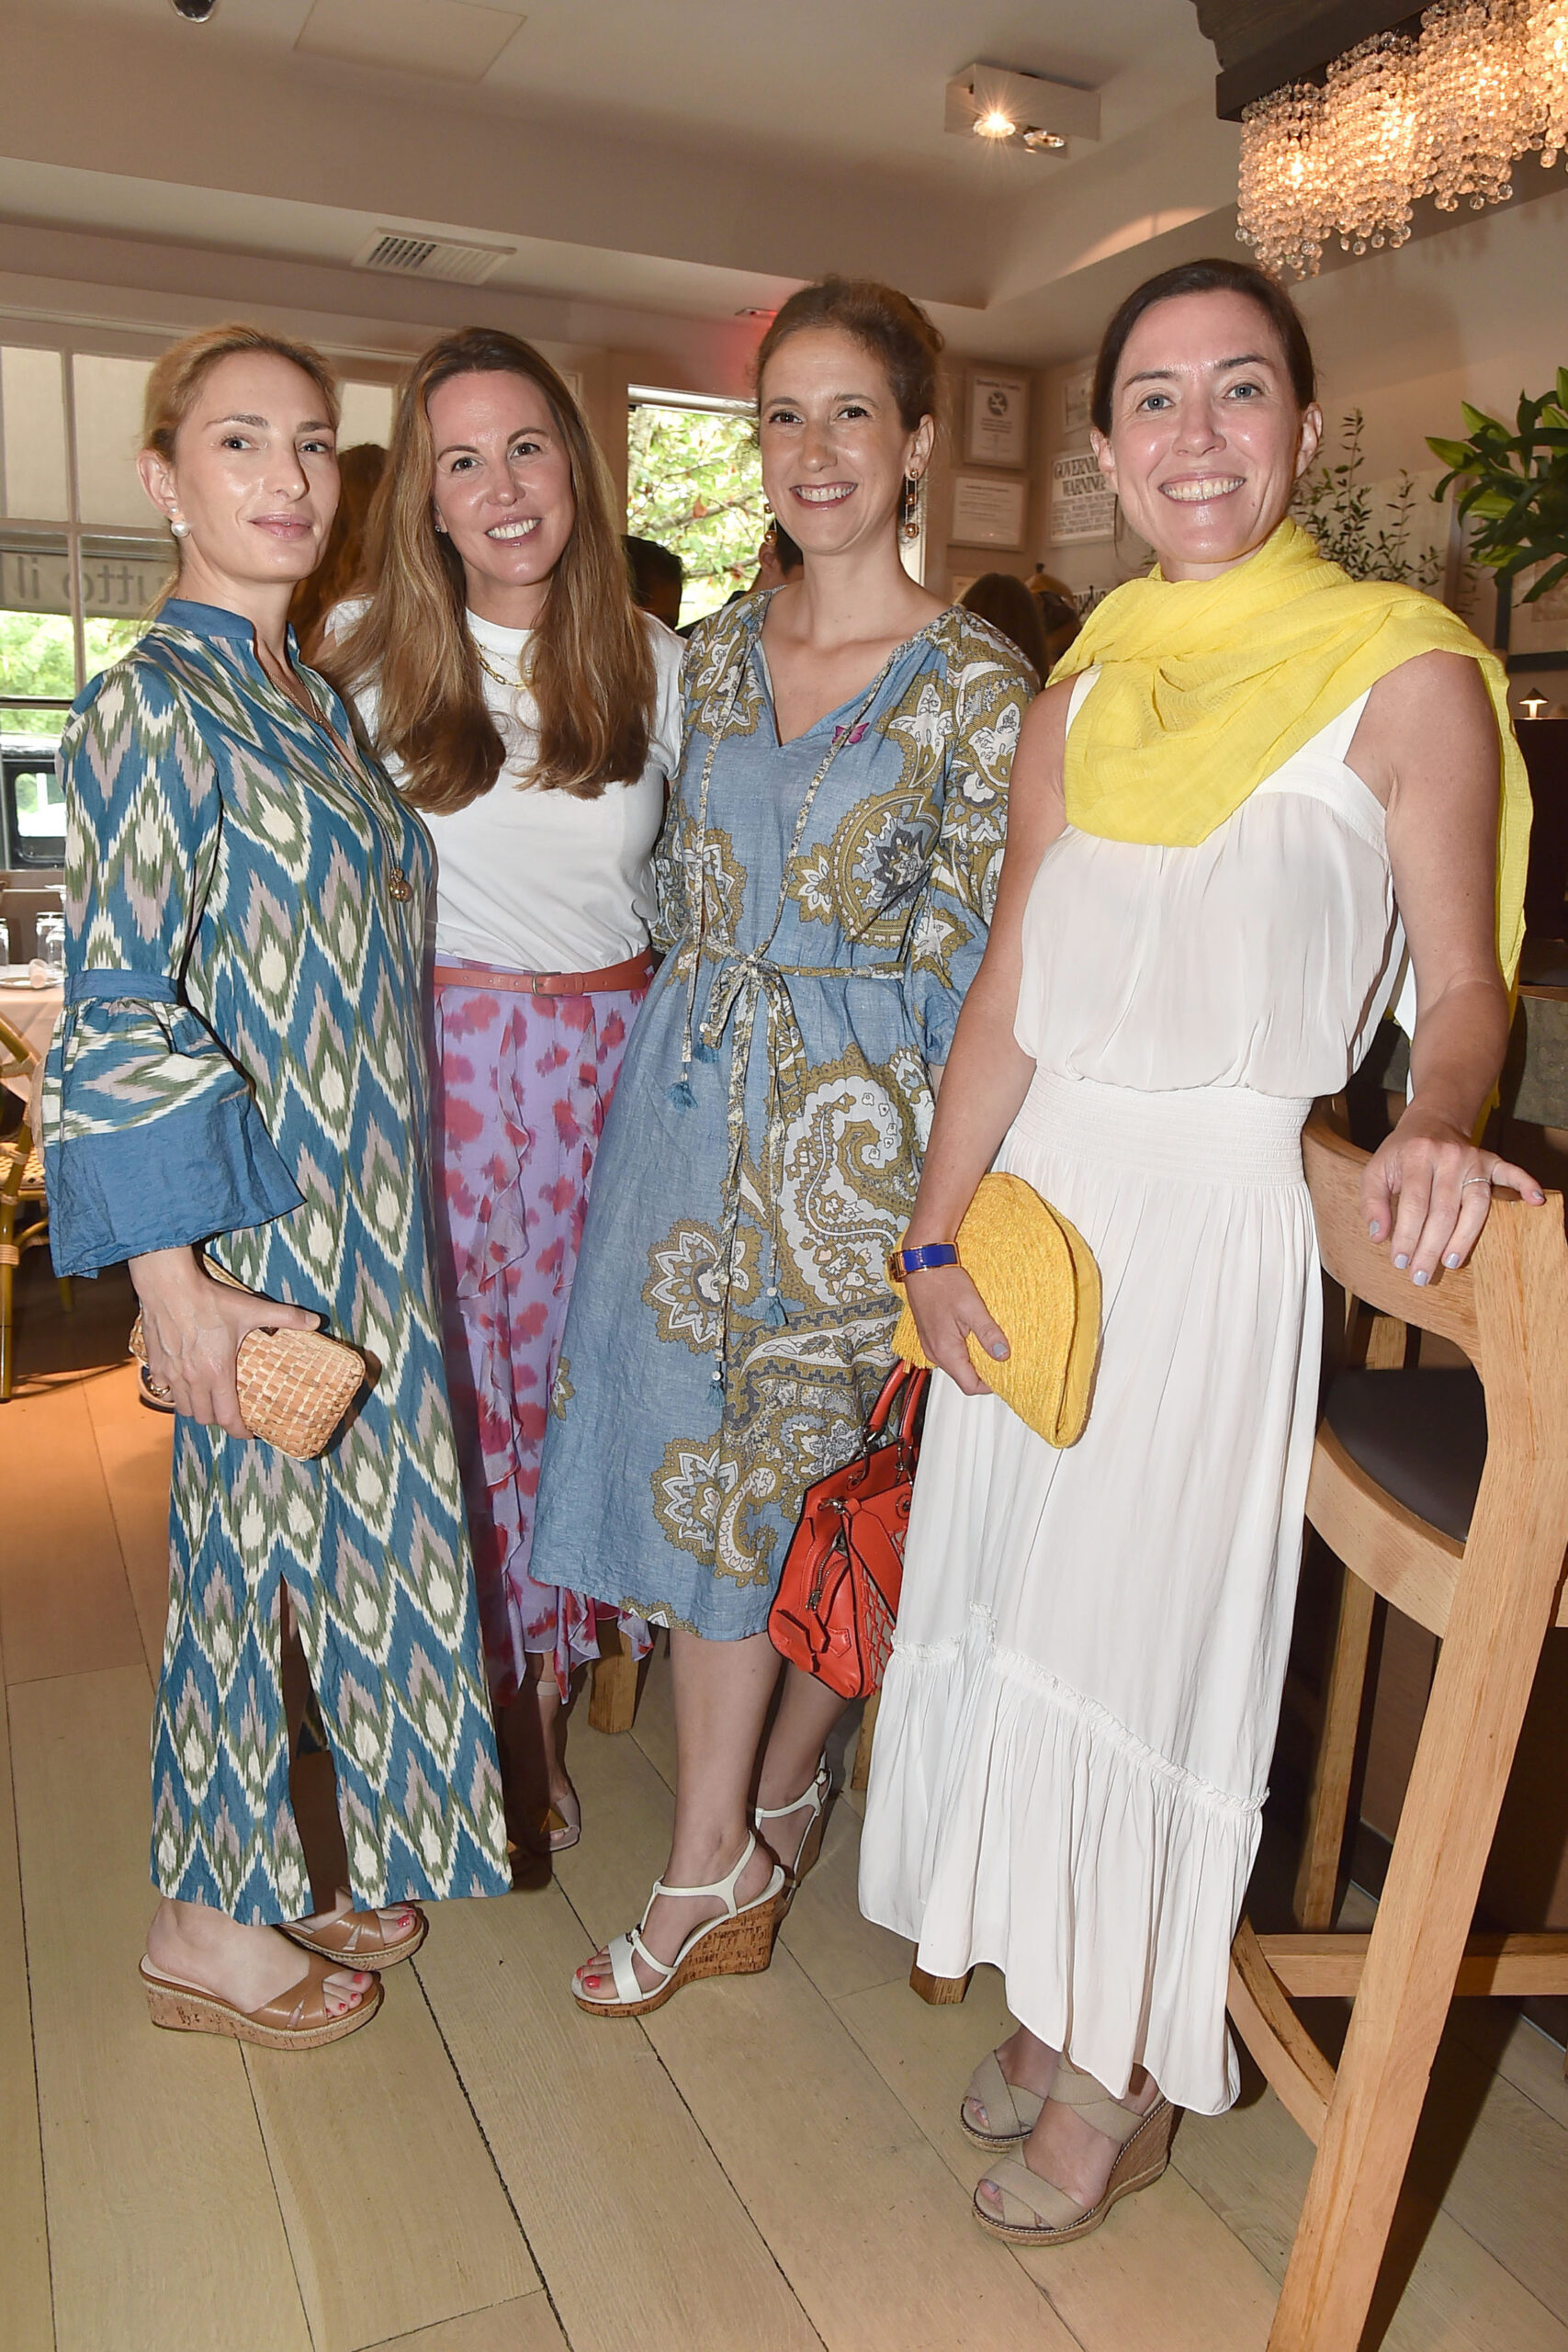 Kara Gerson, Christin Farrar, Genevieve Sonsino, and Jackie Thomson were among those attending the Solving Kids Cancer benefit luncheon at Tutto II Giorno in Southampton on August 1. PATRICK MCMULLEN